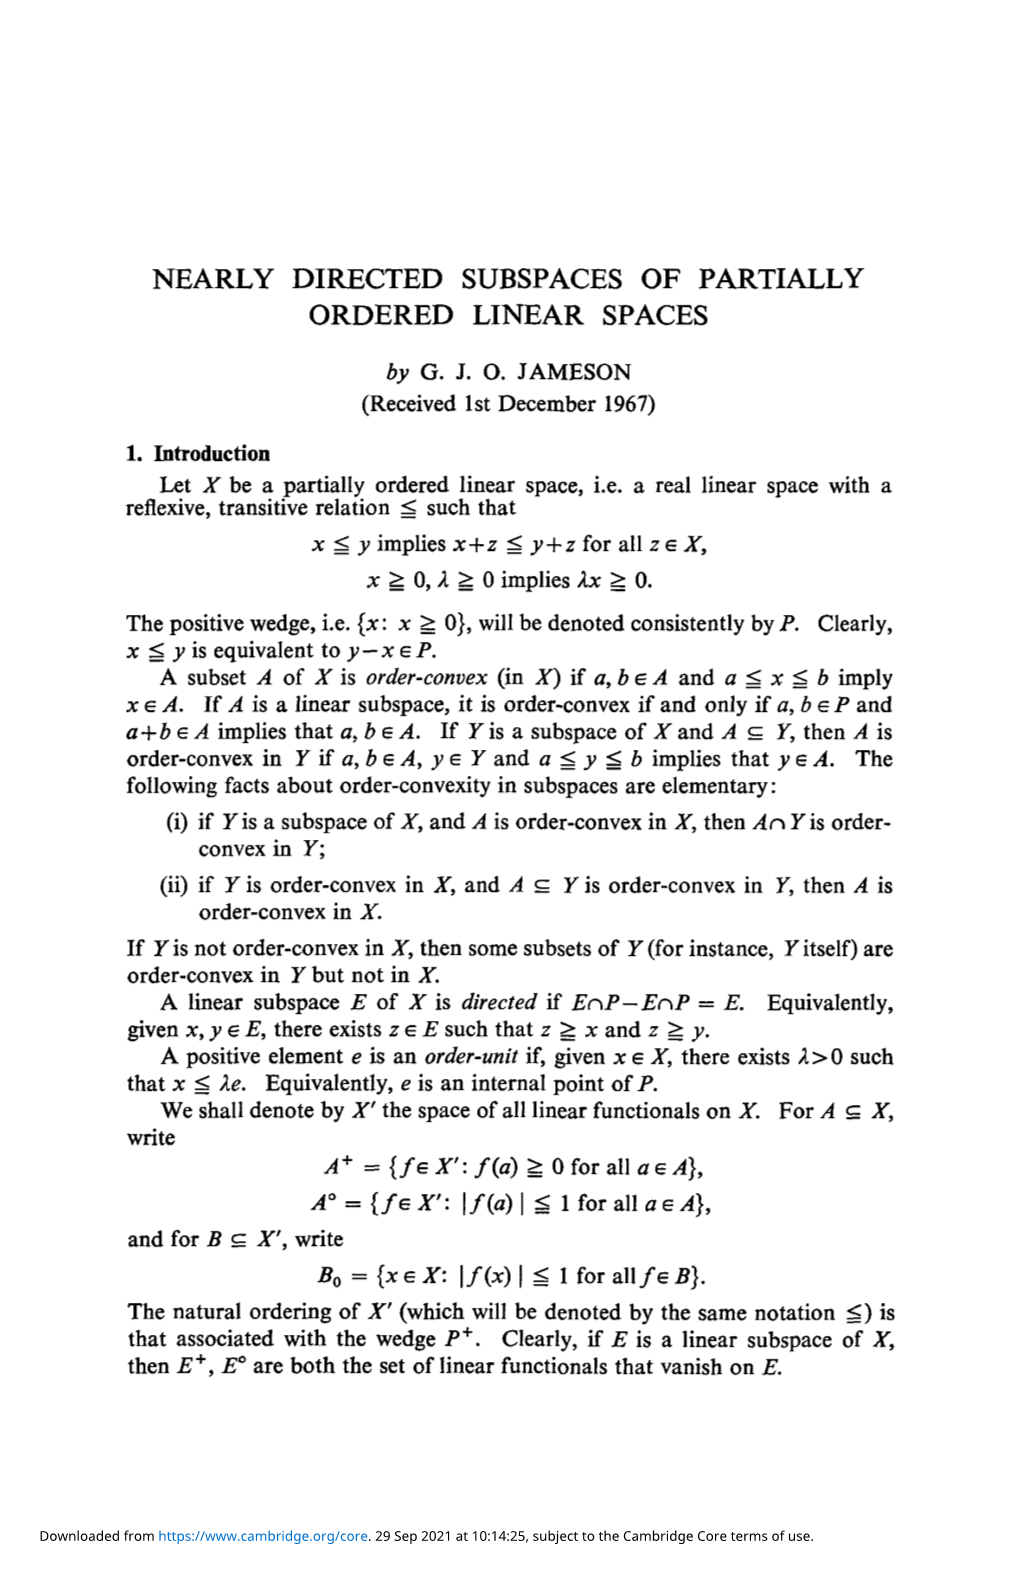 Nearly Directed Subspaces of Partially Ordered Linear Spaces